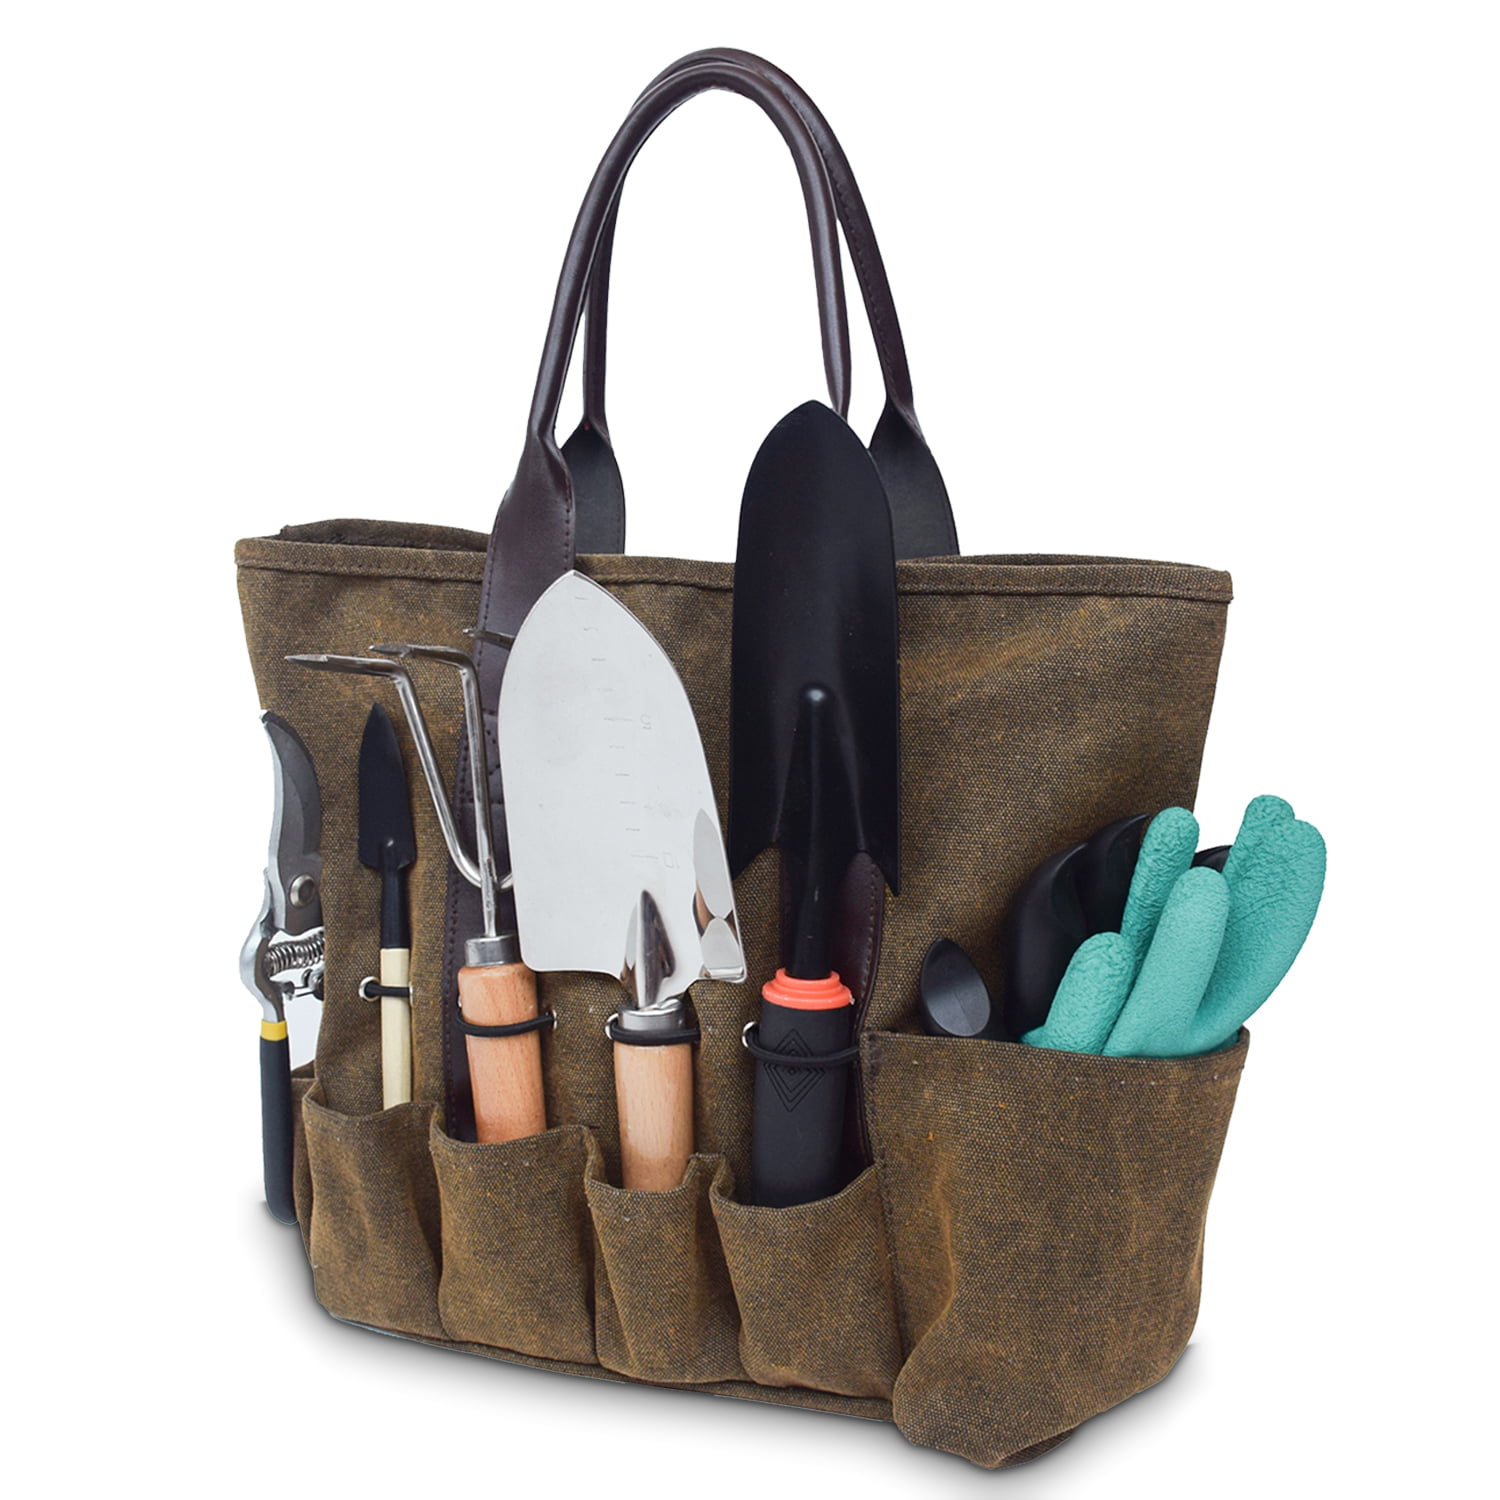 Garden Tool Bag Canvas Heavy-Duty Gardening Tote Garden Tools No Included Hand Tool Storage Tote Organizer with 8 Pockets